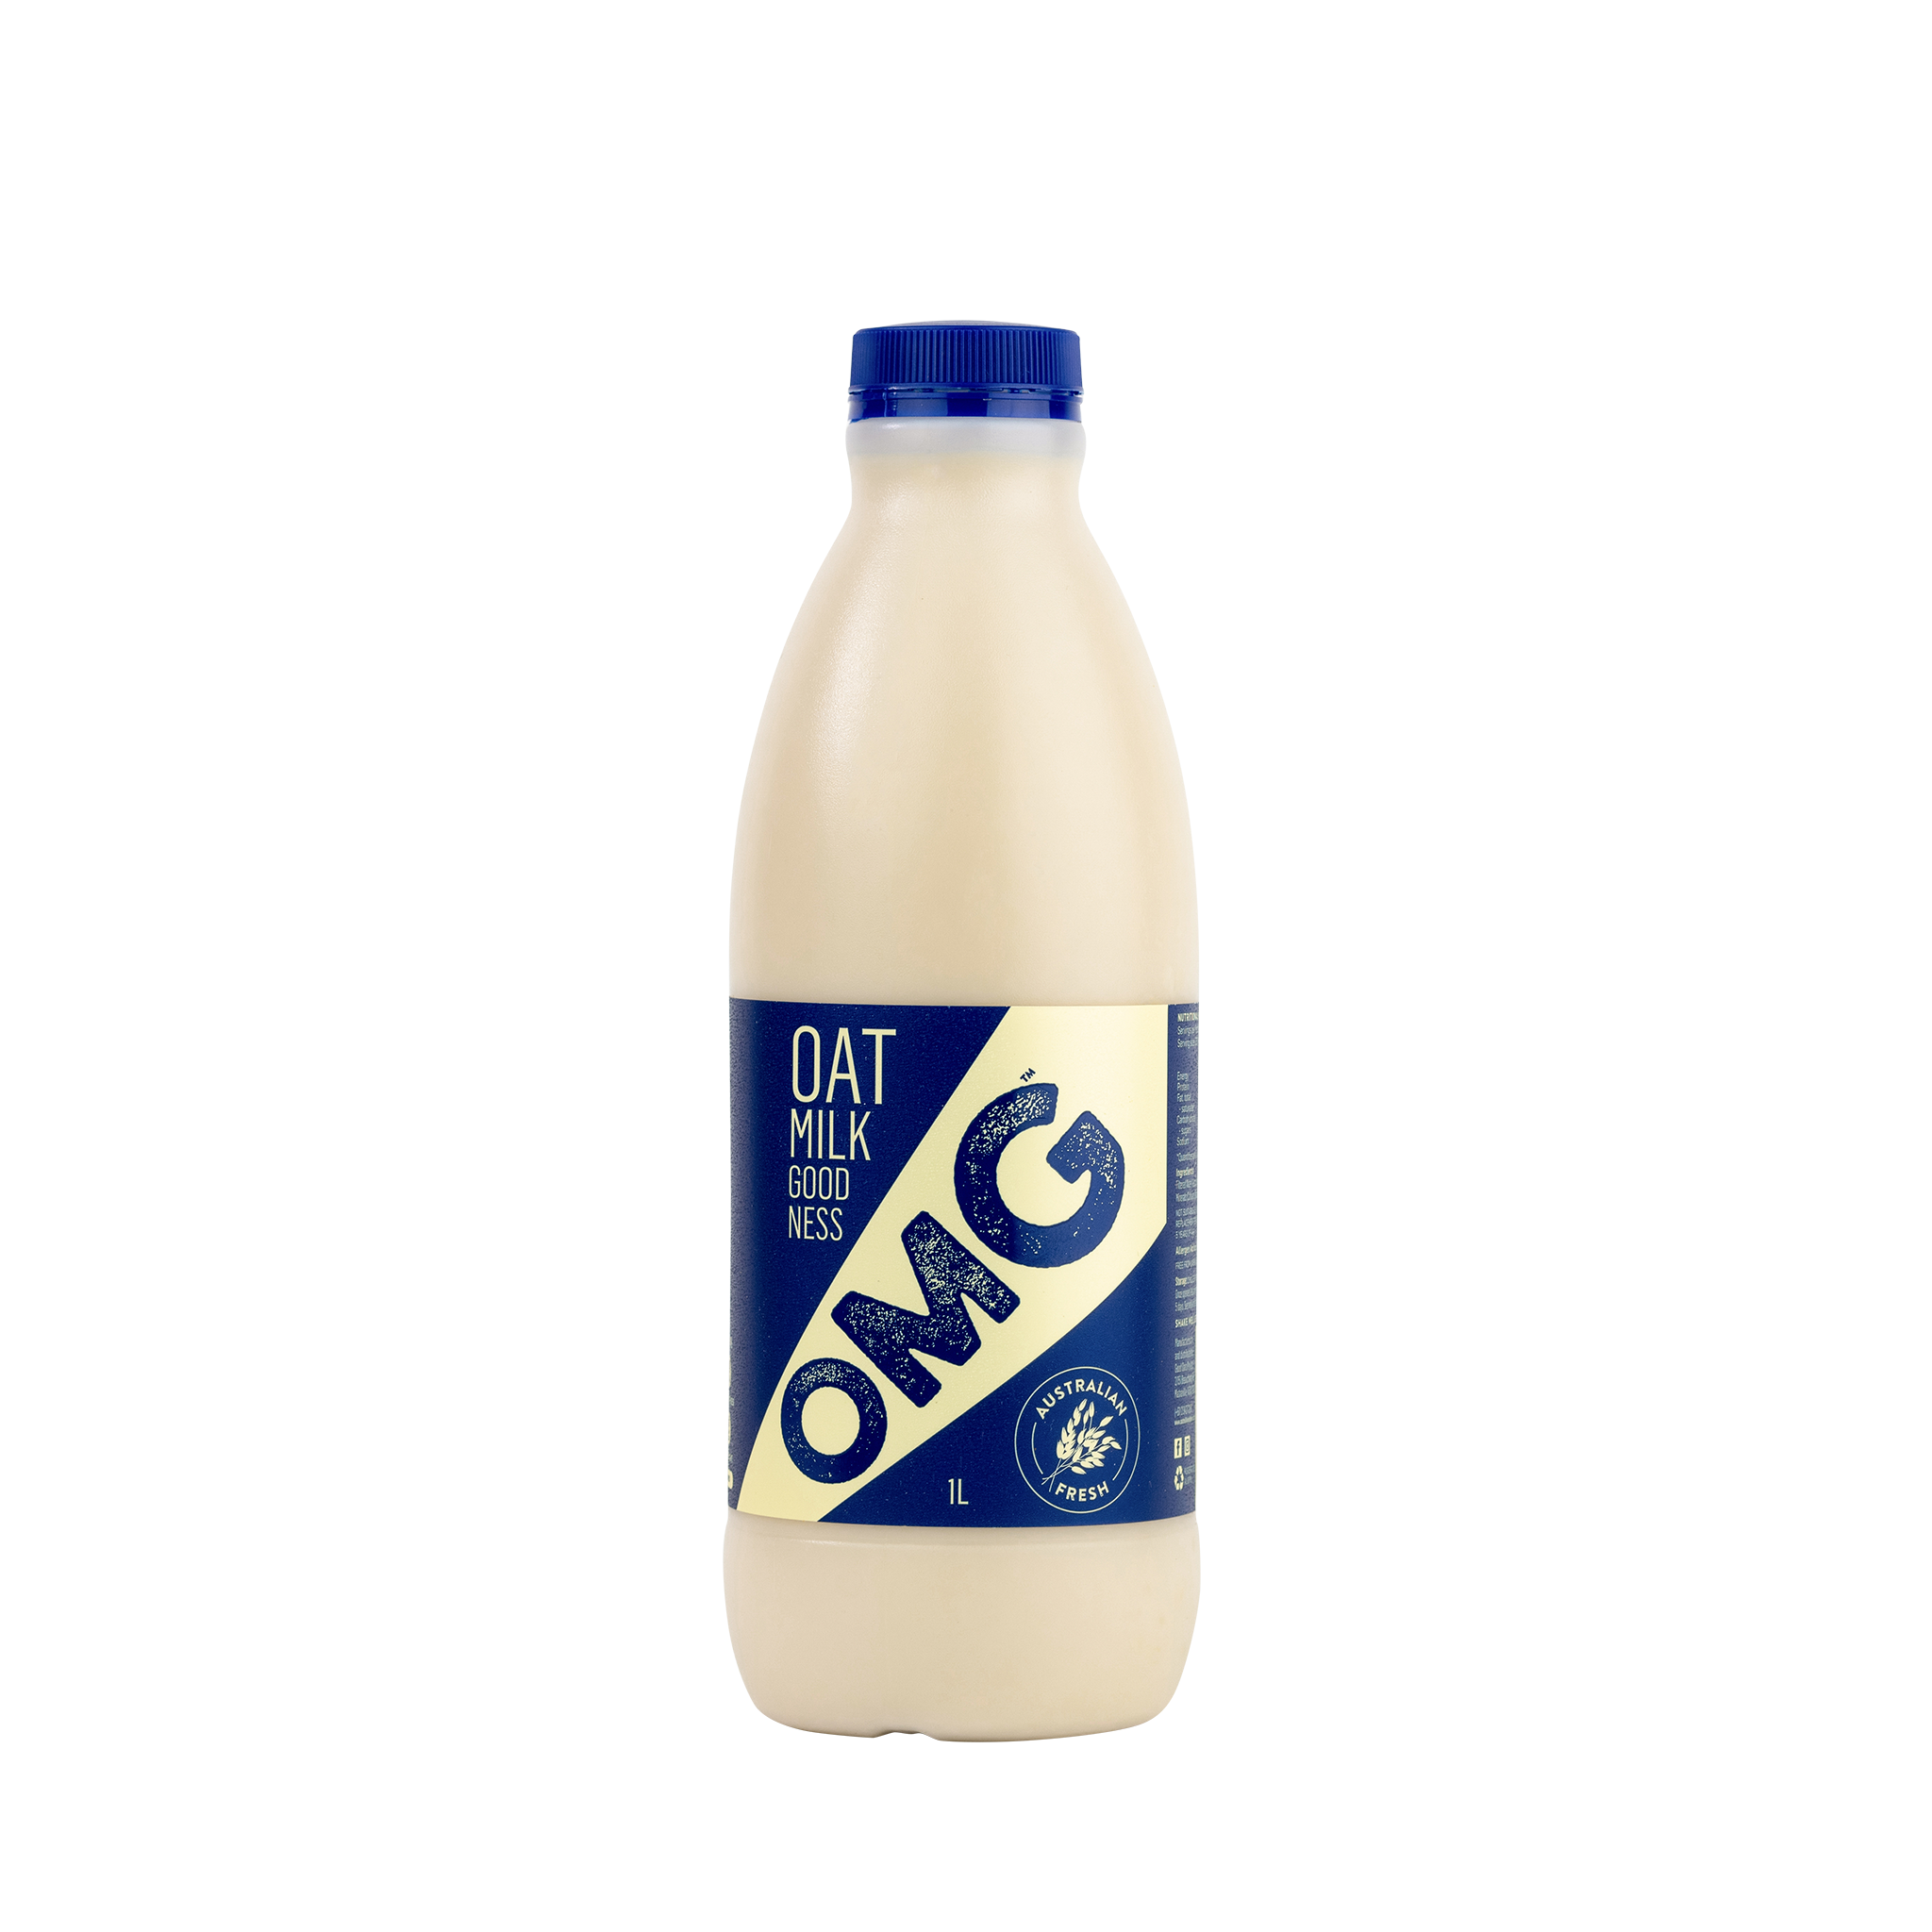 OMG Oat Milk Goodness is here! Image